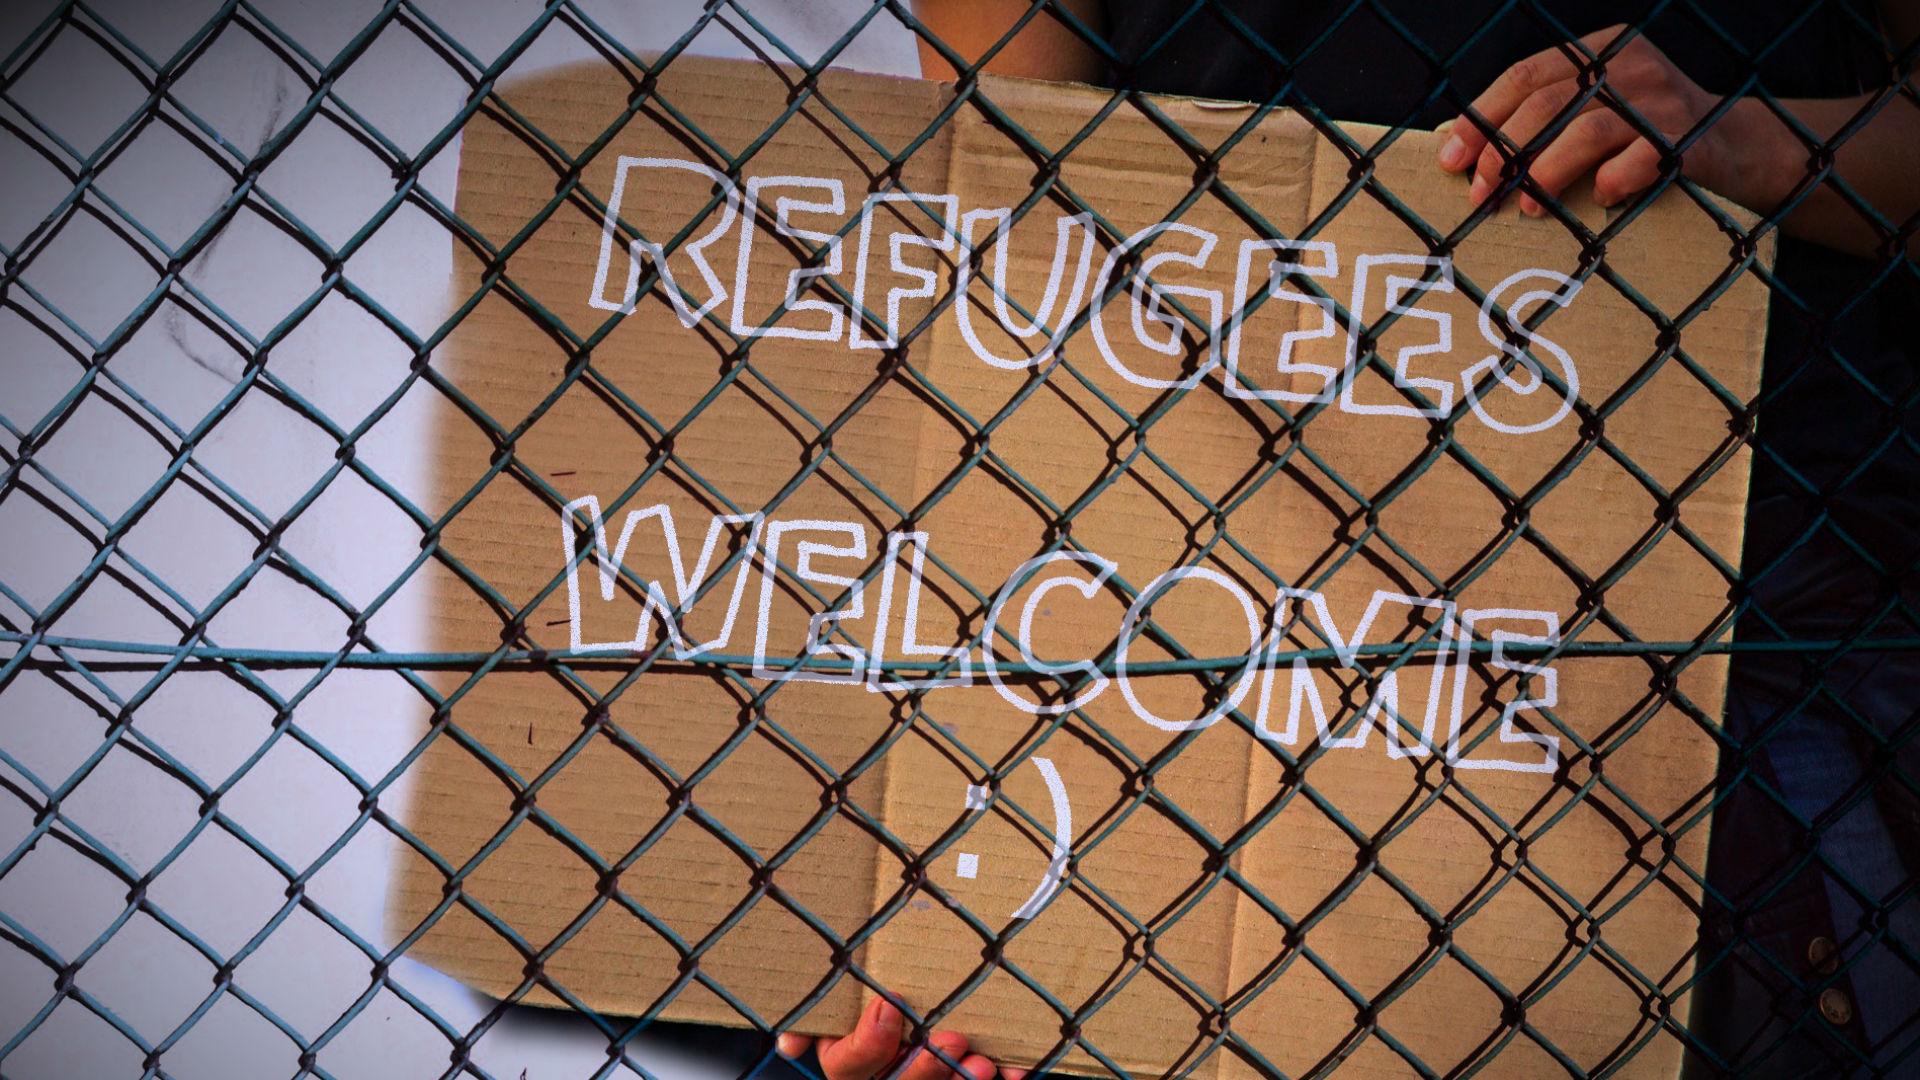 Refugees welcome notice held behind fence